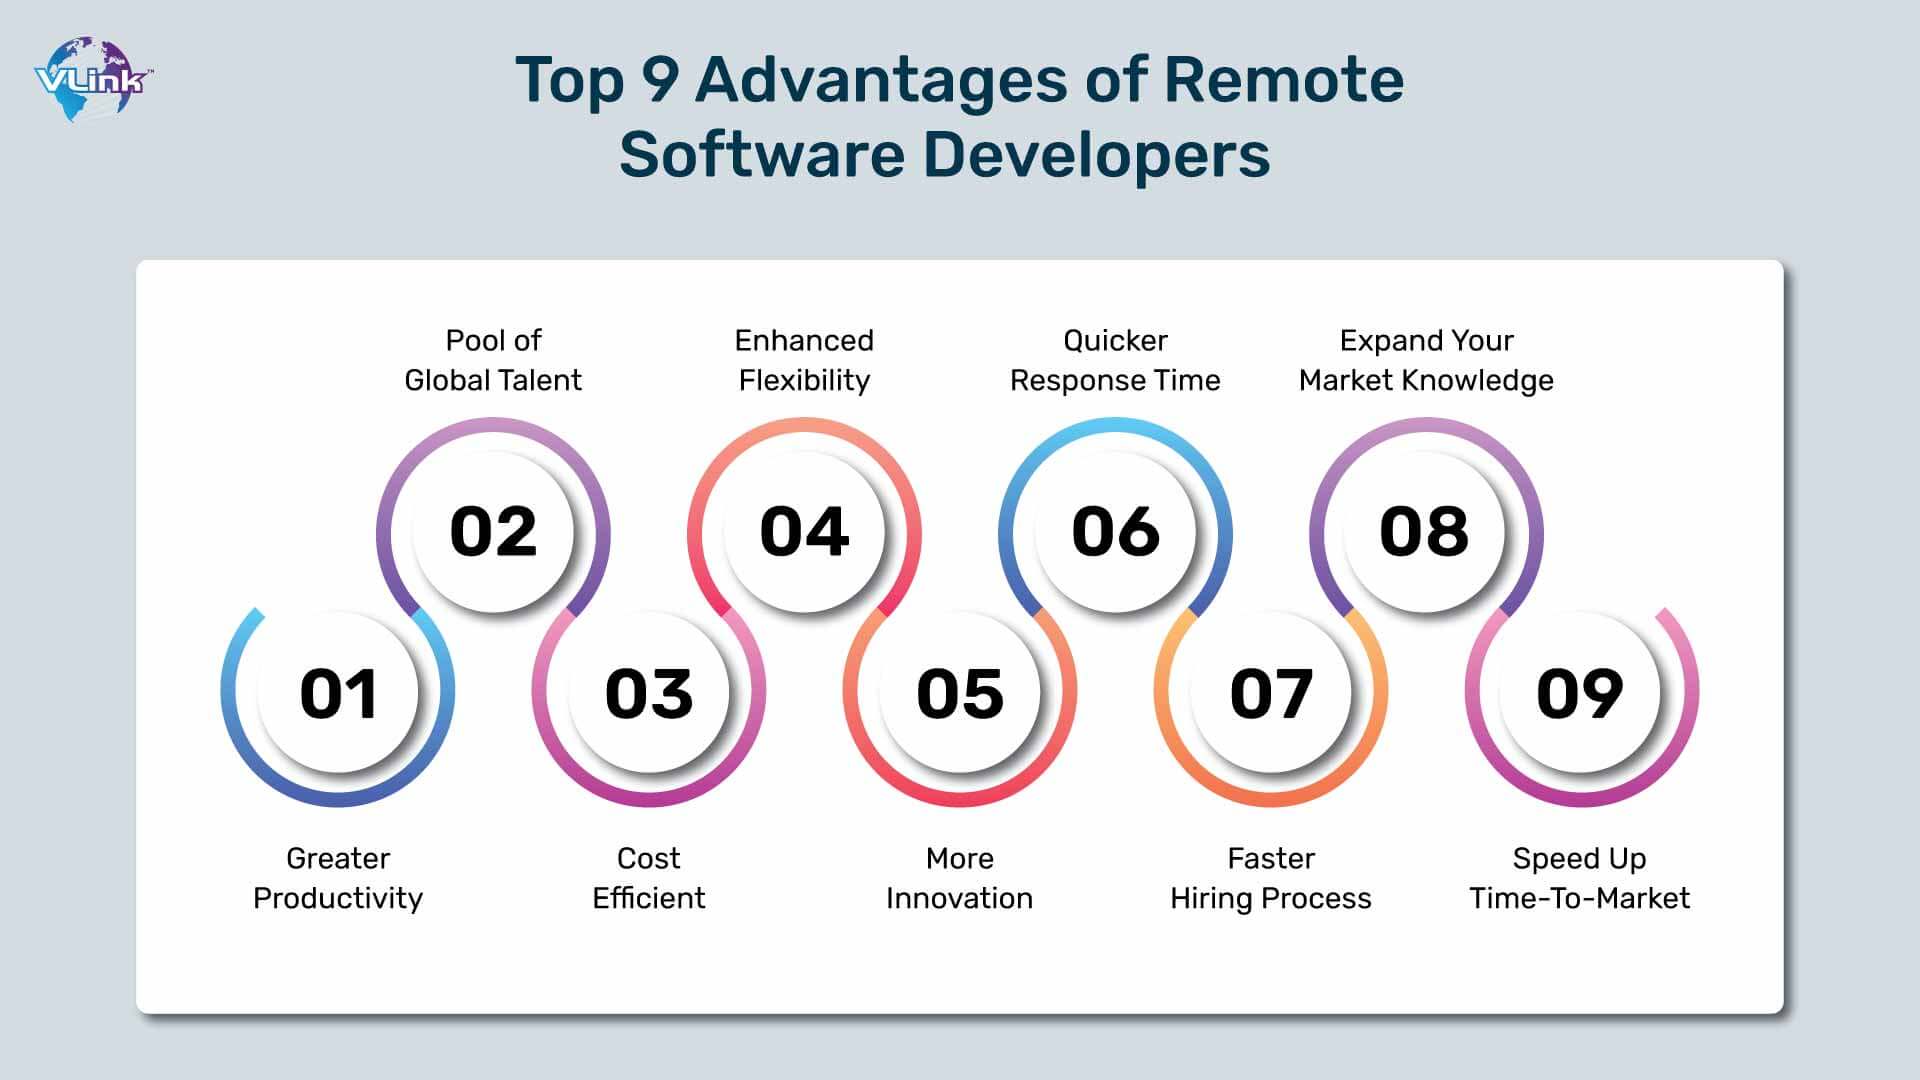 Top 9 Advantages of Remote Software Developers